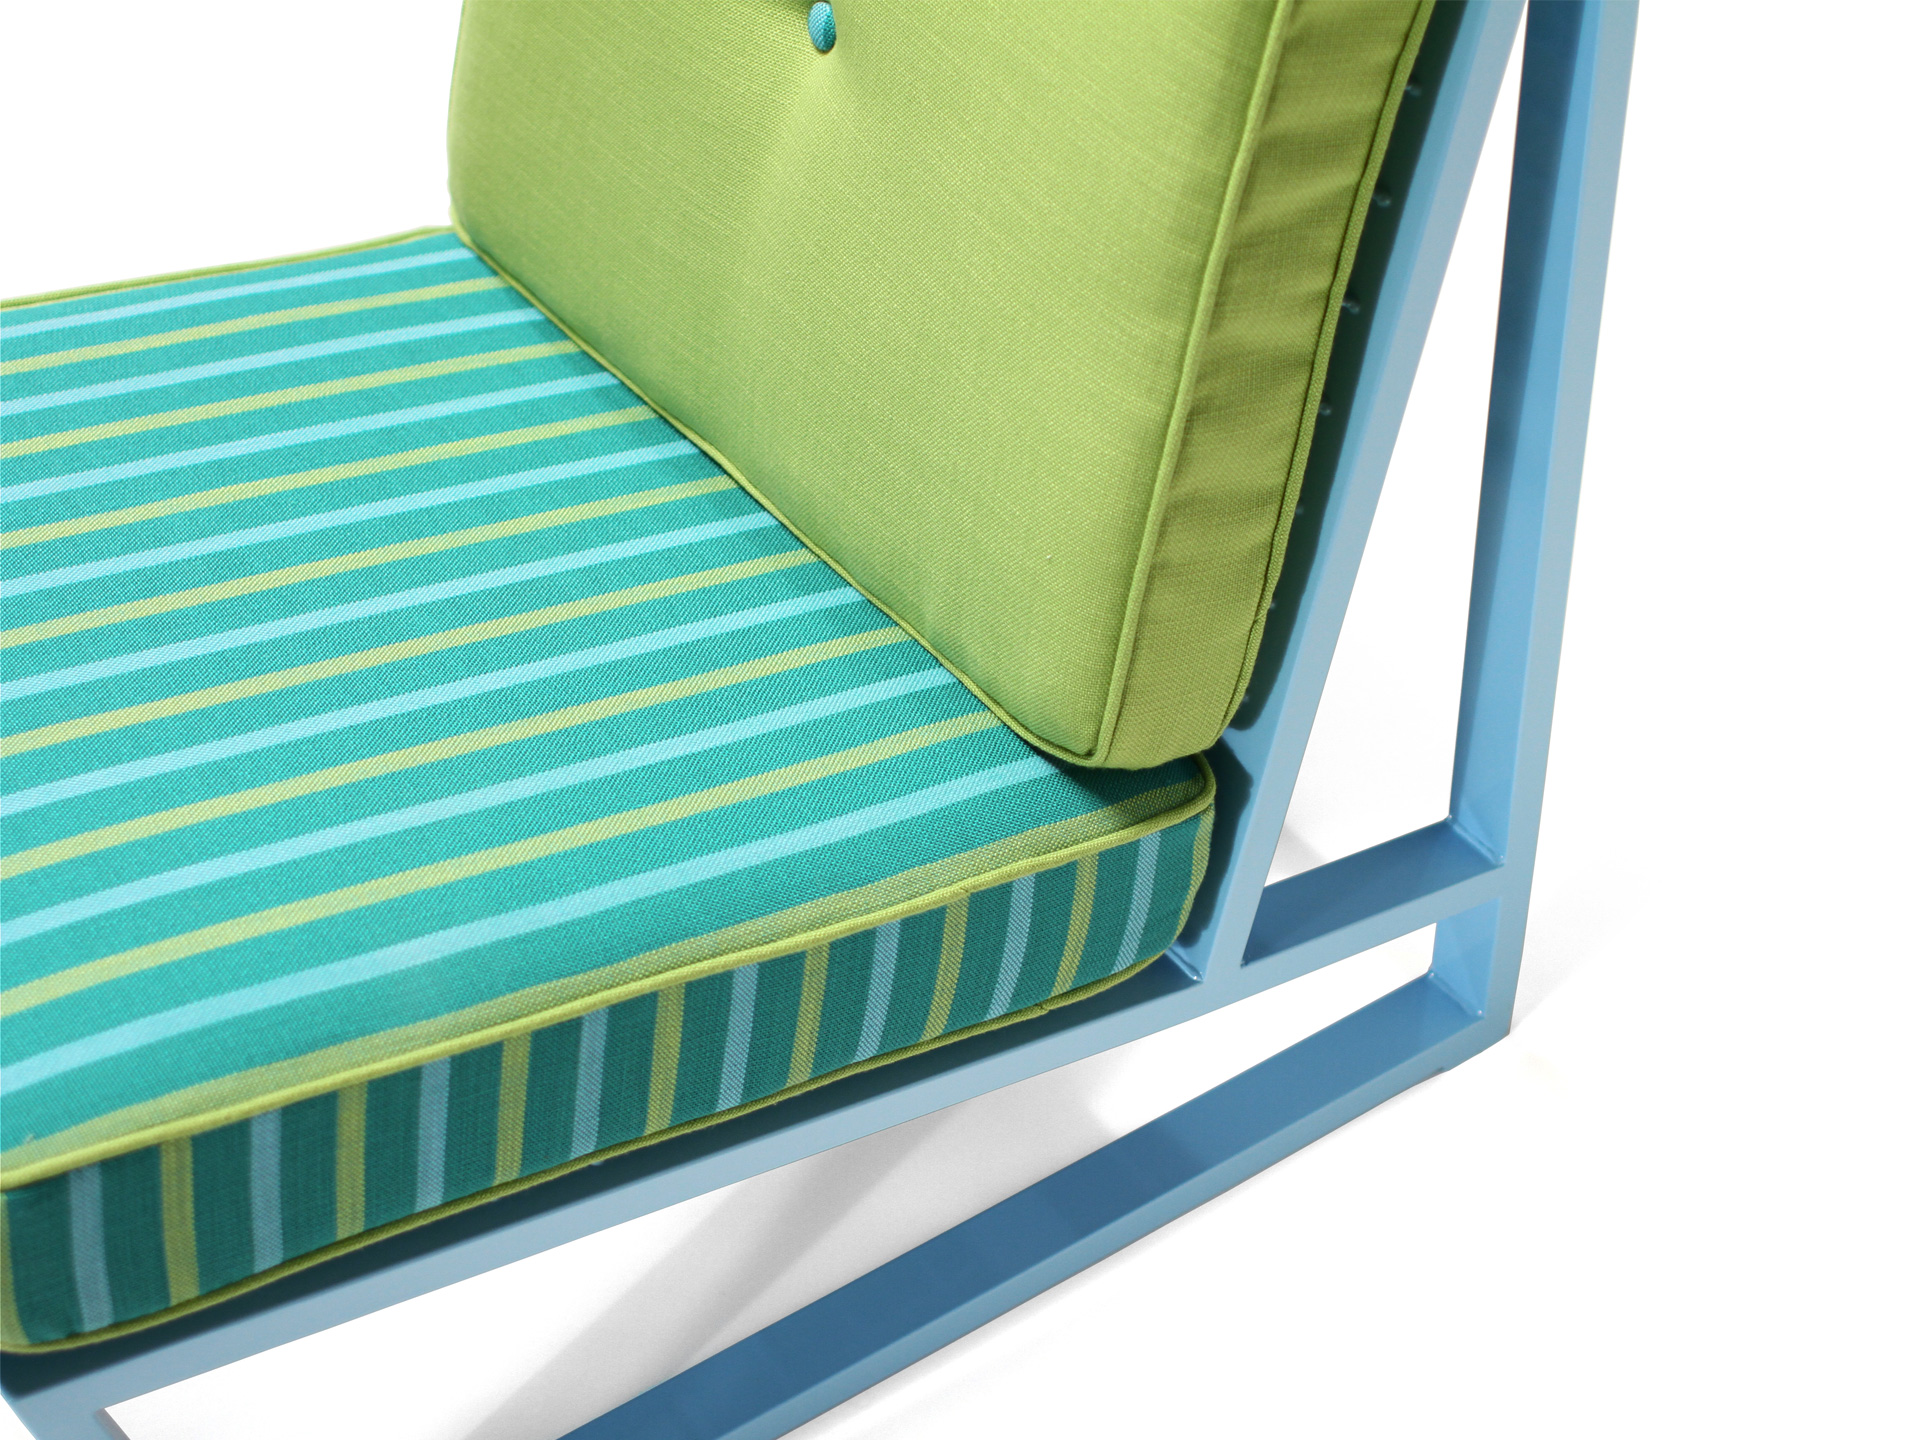 Detail of Del Calle chair from the side